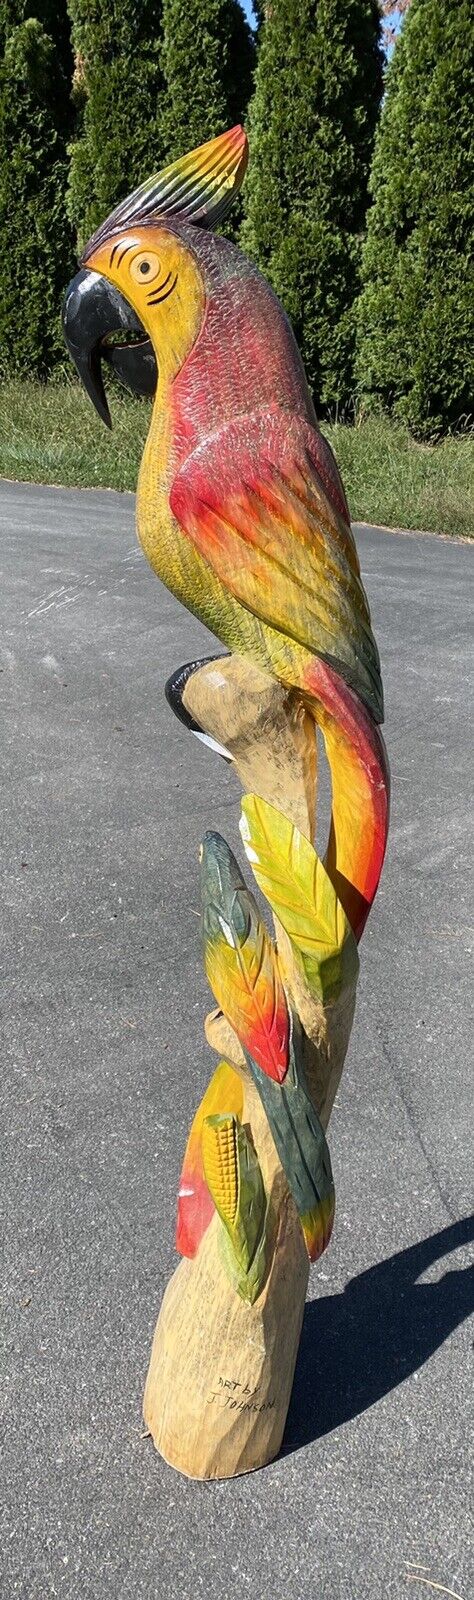 Huge 5’ Tall ARTIST CREATED - HAND CARVED - SOLID WOOD HAND PAINTED PARROTS